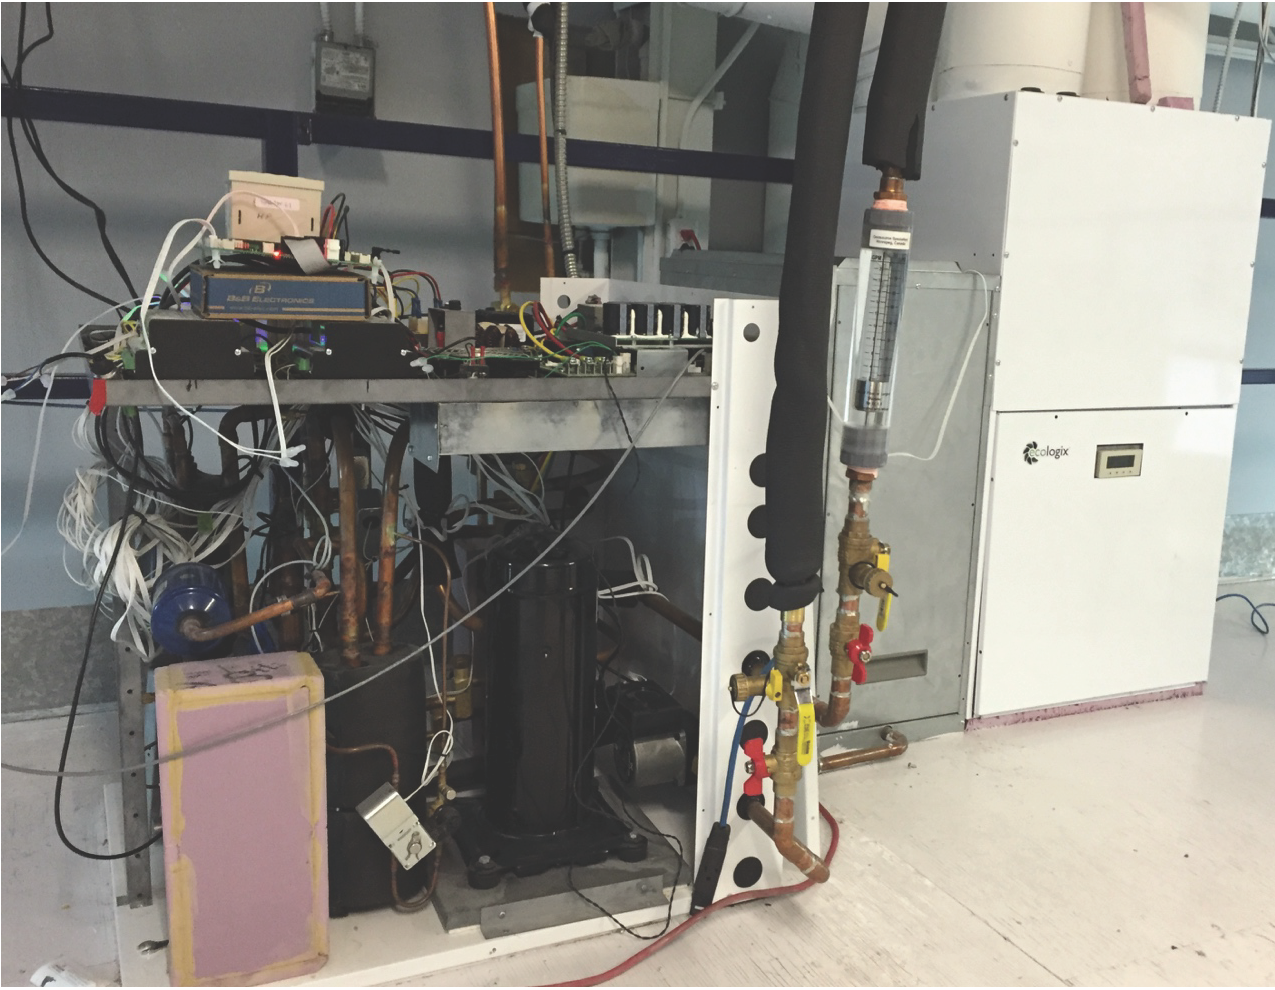 The photo shows the interior of the Ecologix prototype integrated heat pump module, connected to various instruments for laboratory testing, with its air handler in the background